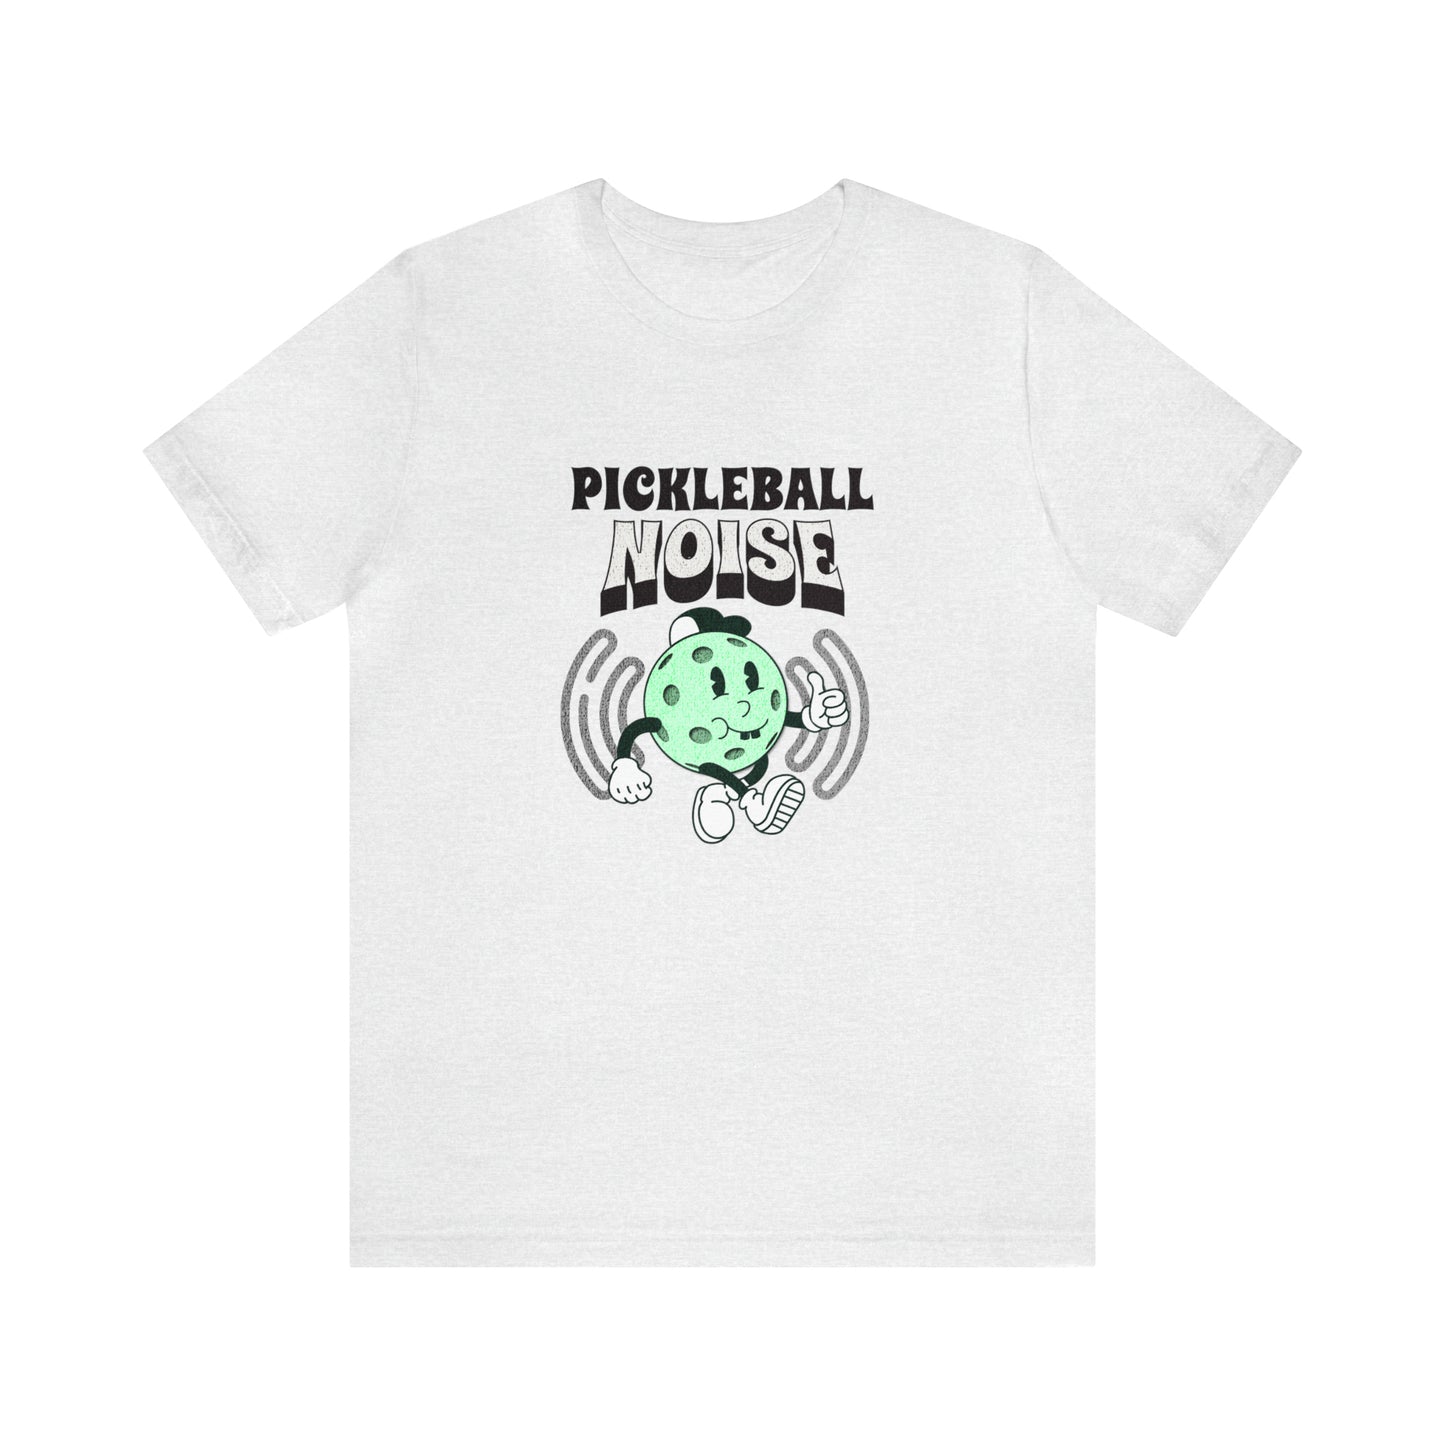 Pickleball Noise: Embrace the Sounds